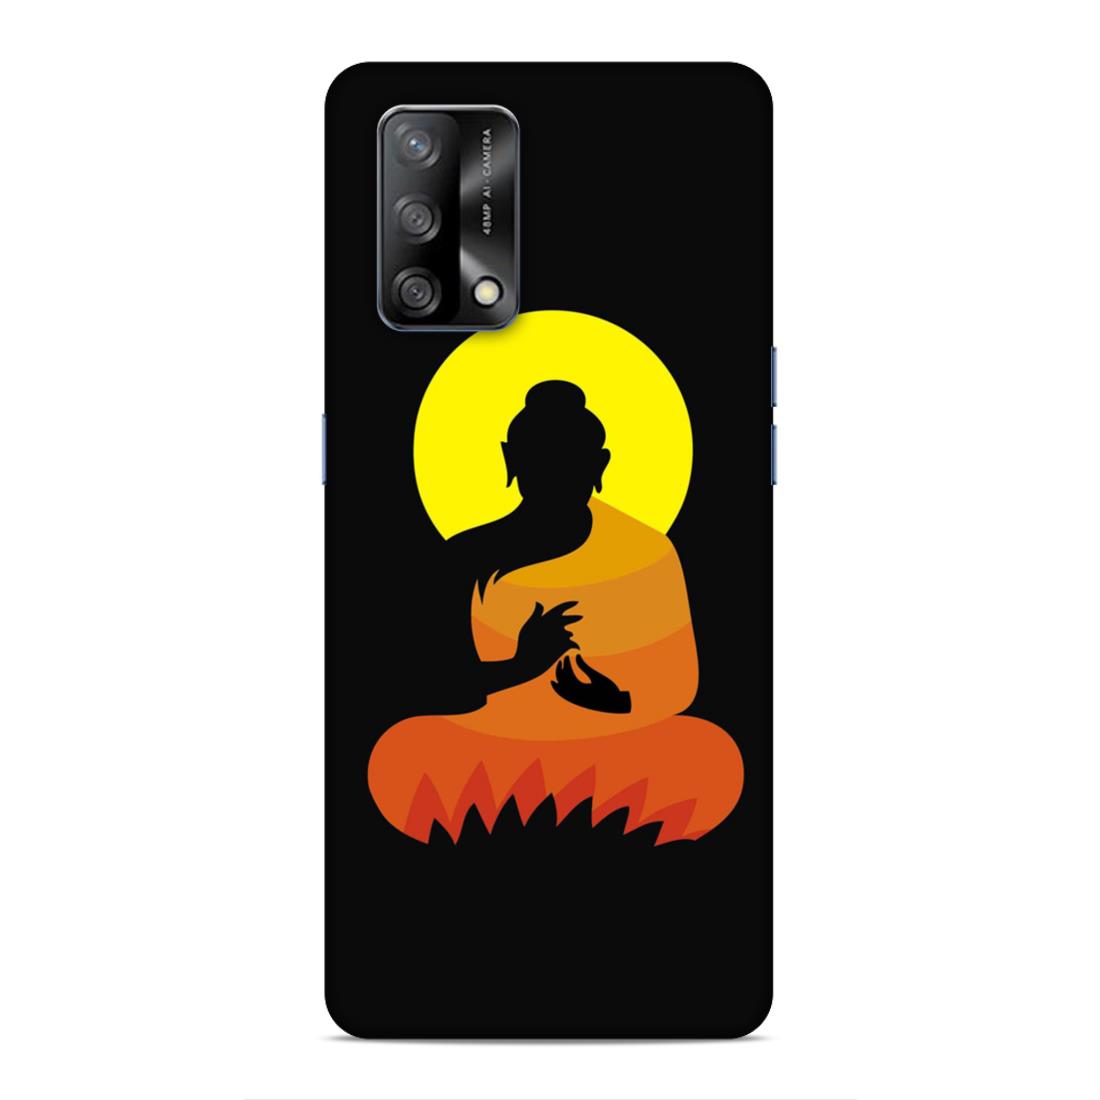 Lord Buddha Hard Back Case For Oppo F19 / F19s